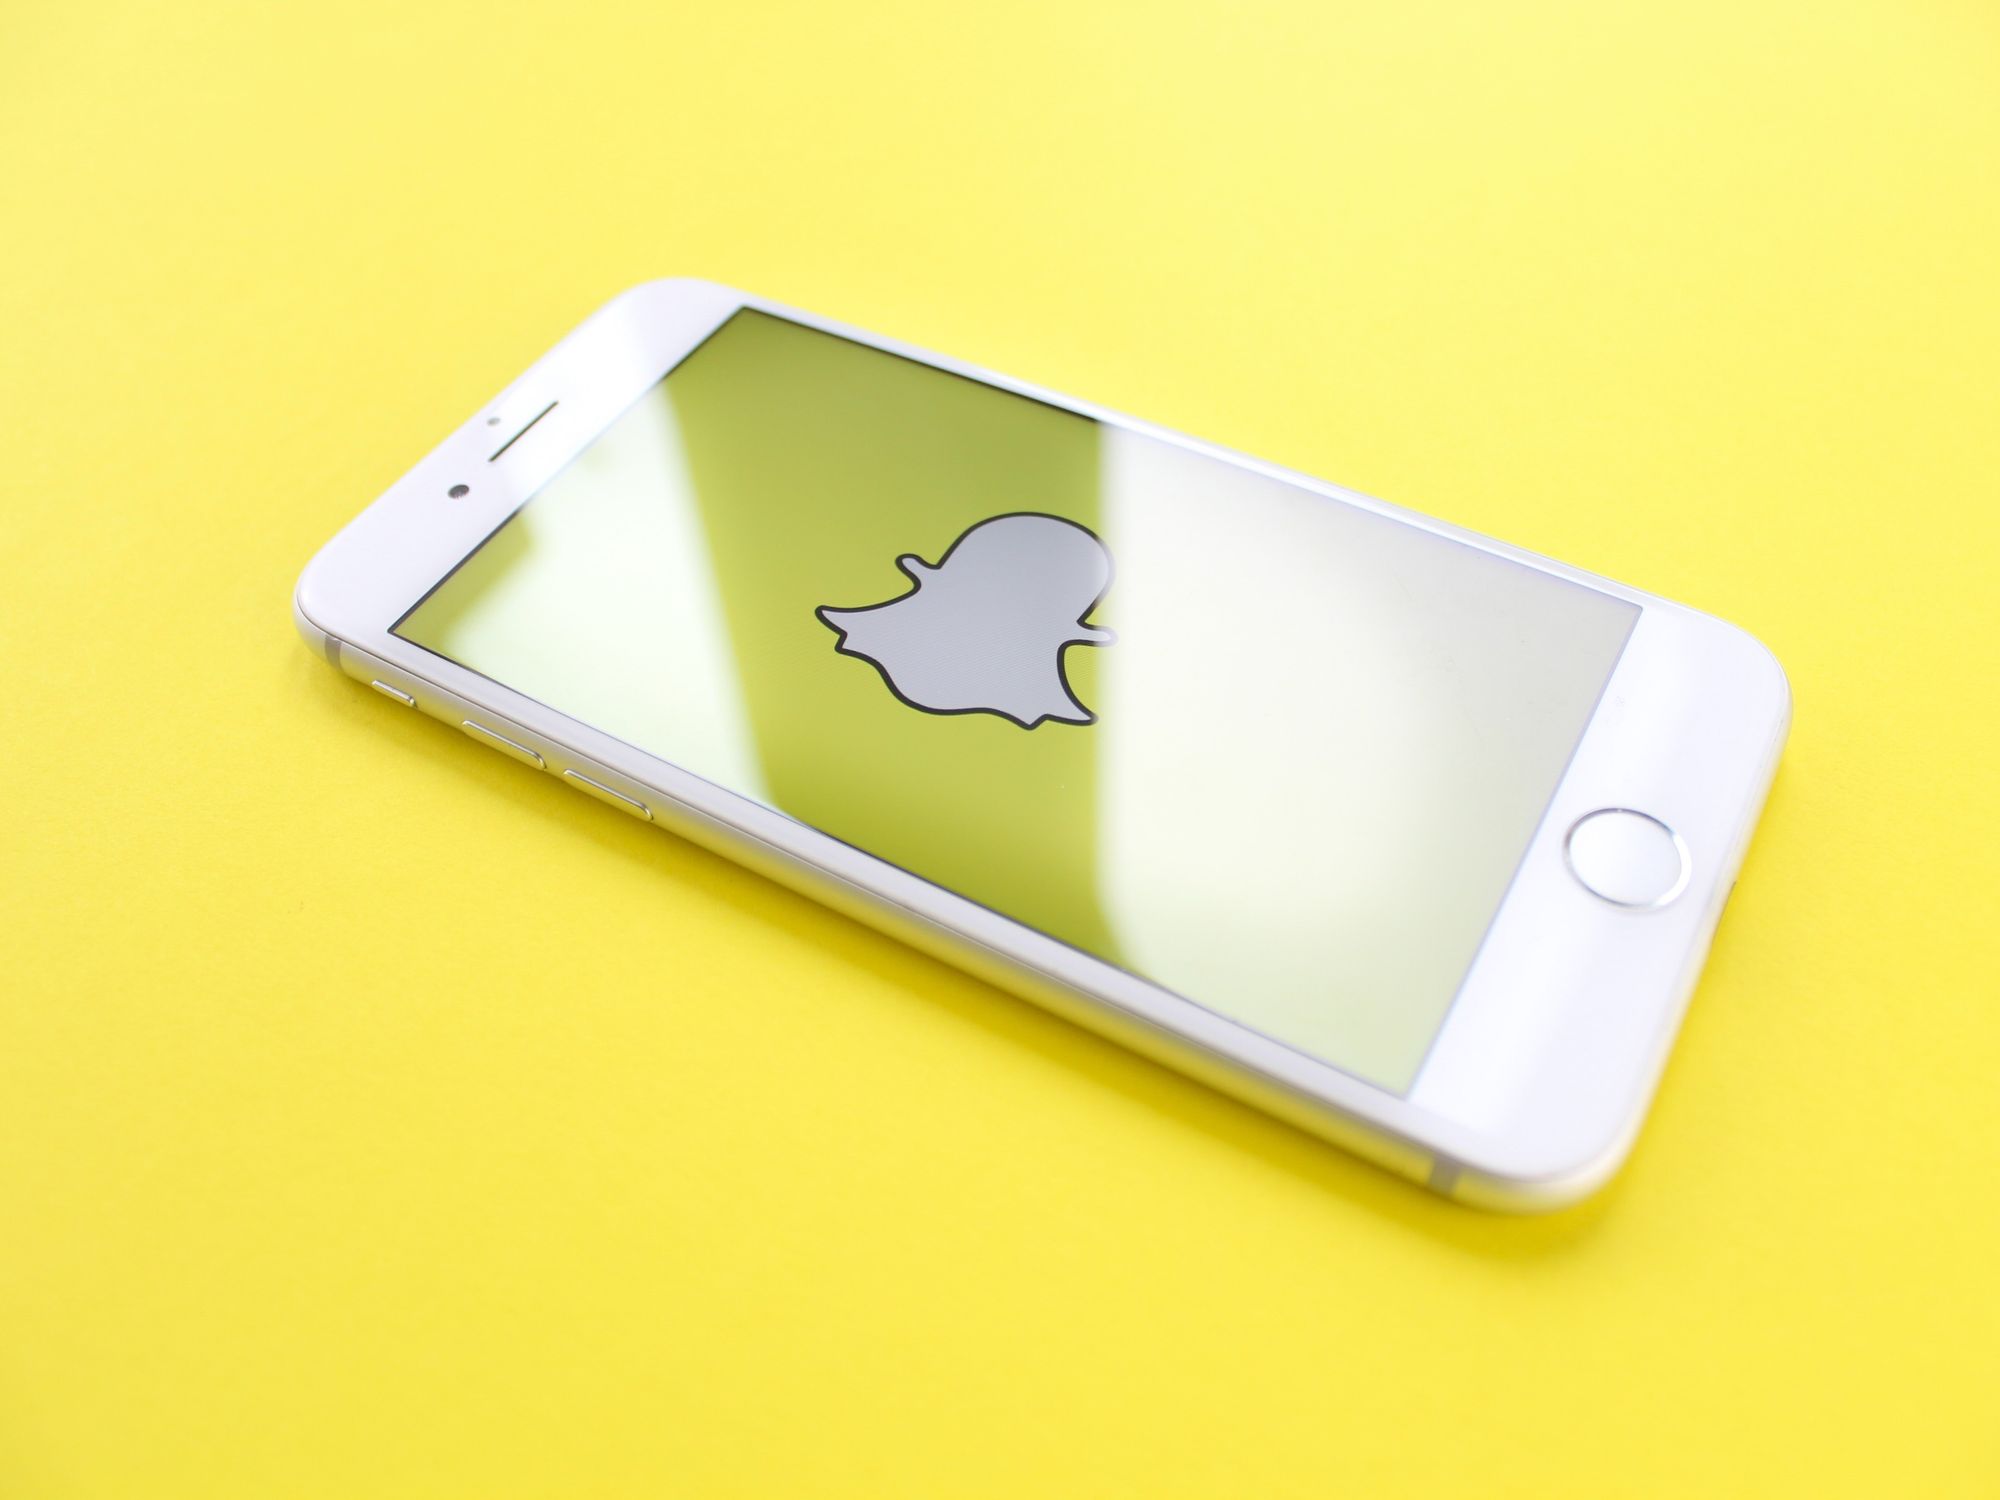 Snap Adds Millions of New Users, Shares Sink Despite Revenue Gains